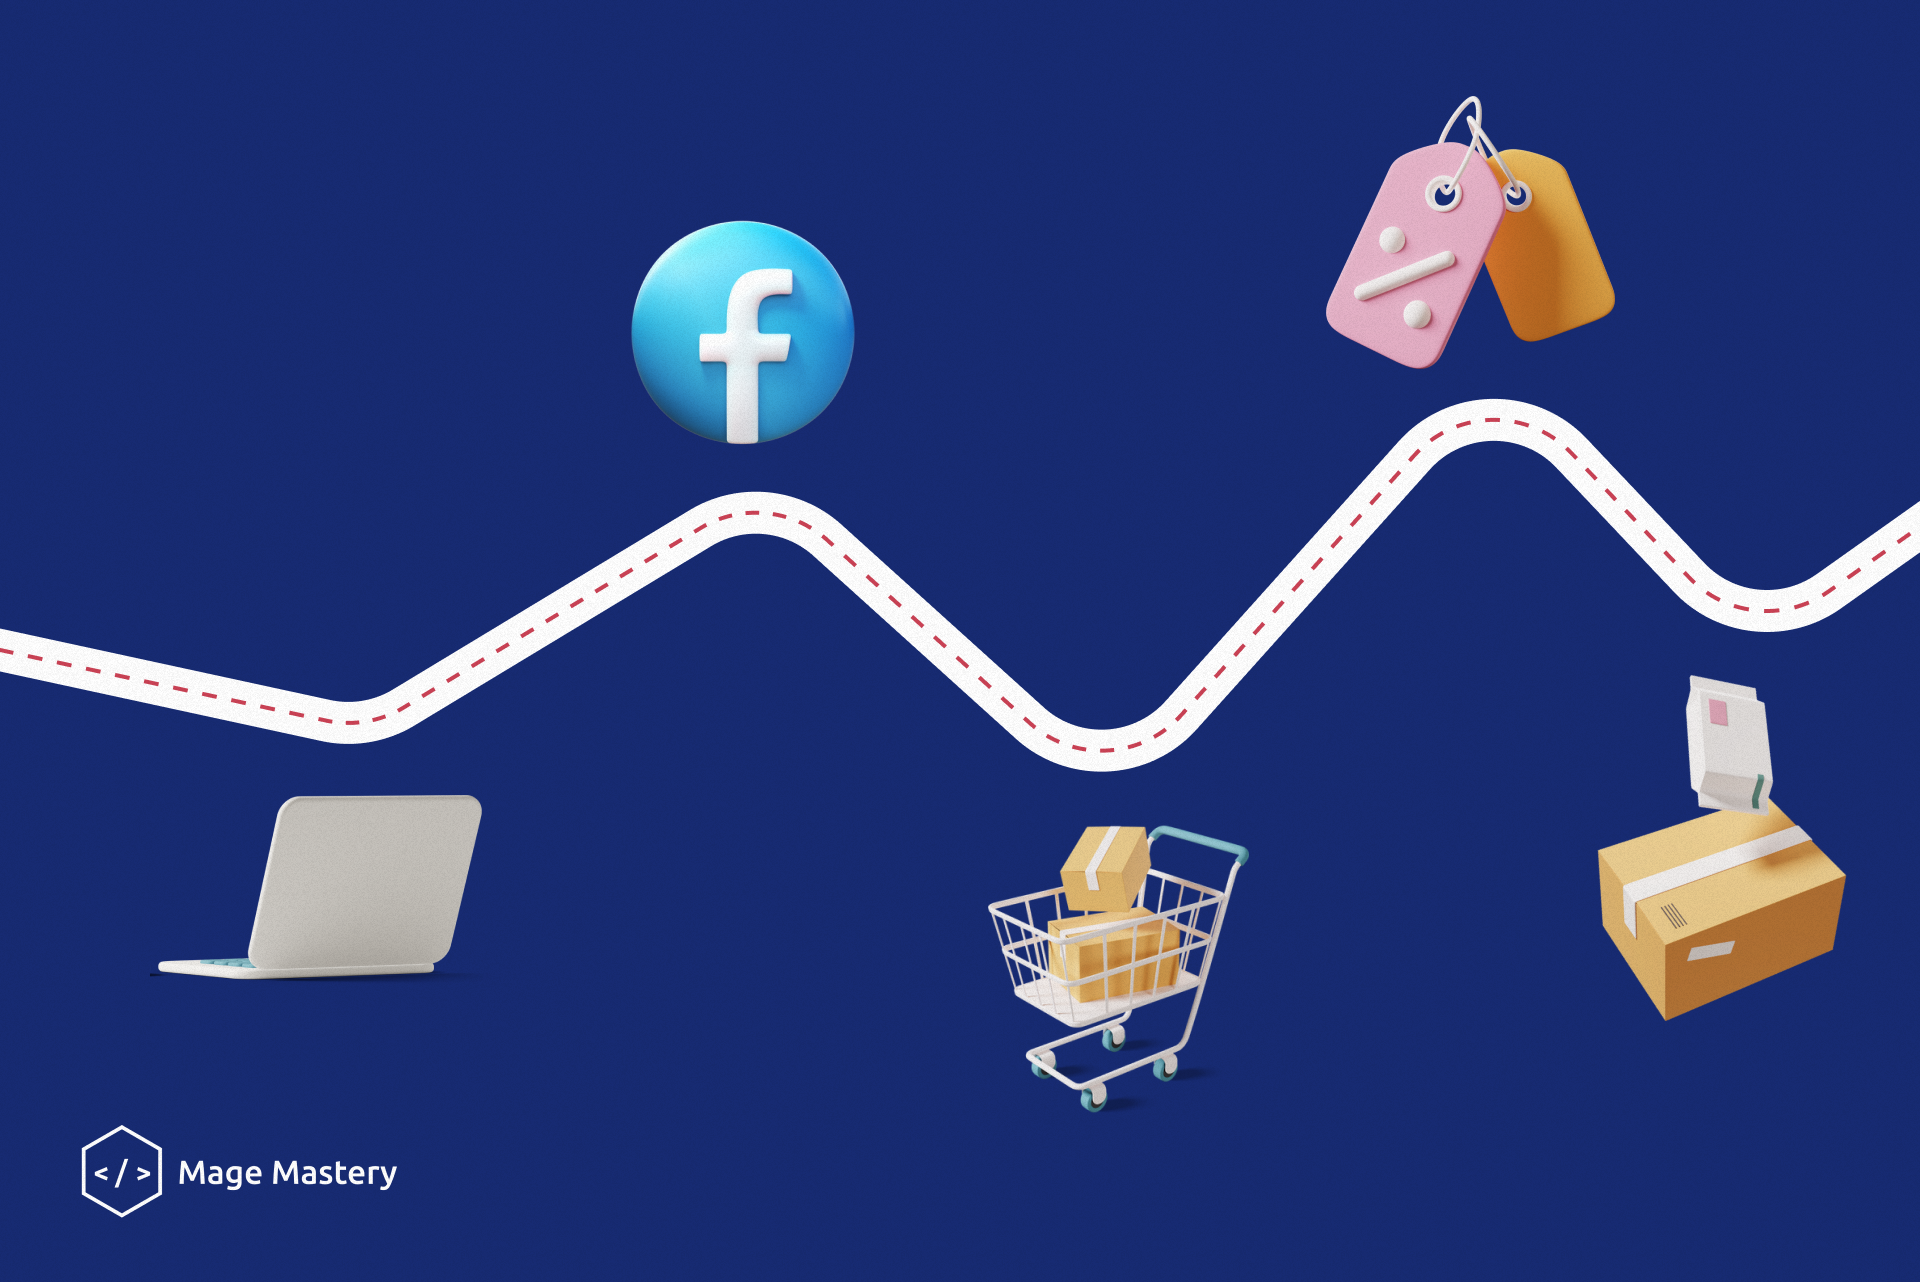 Customer journey map: a look at the product from the target audience